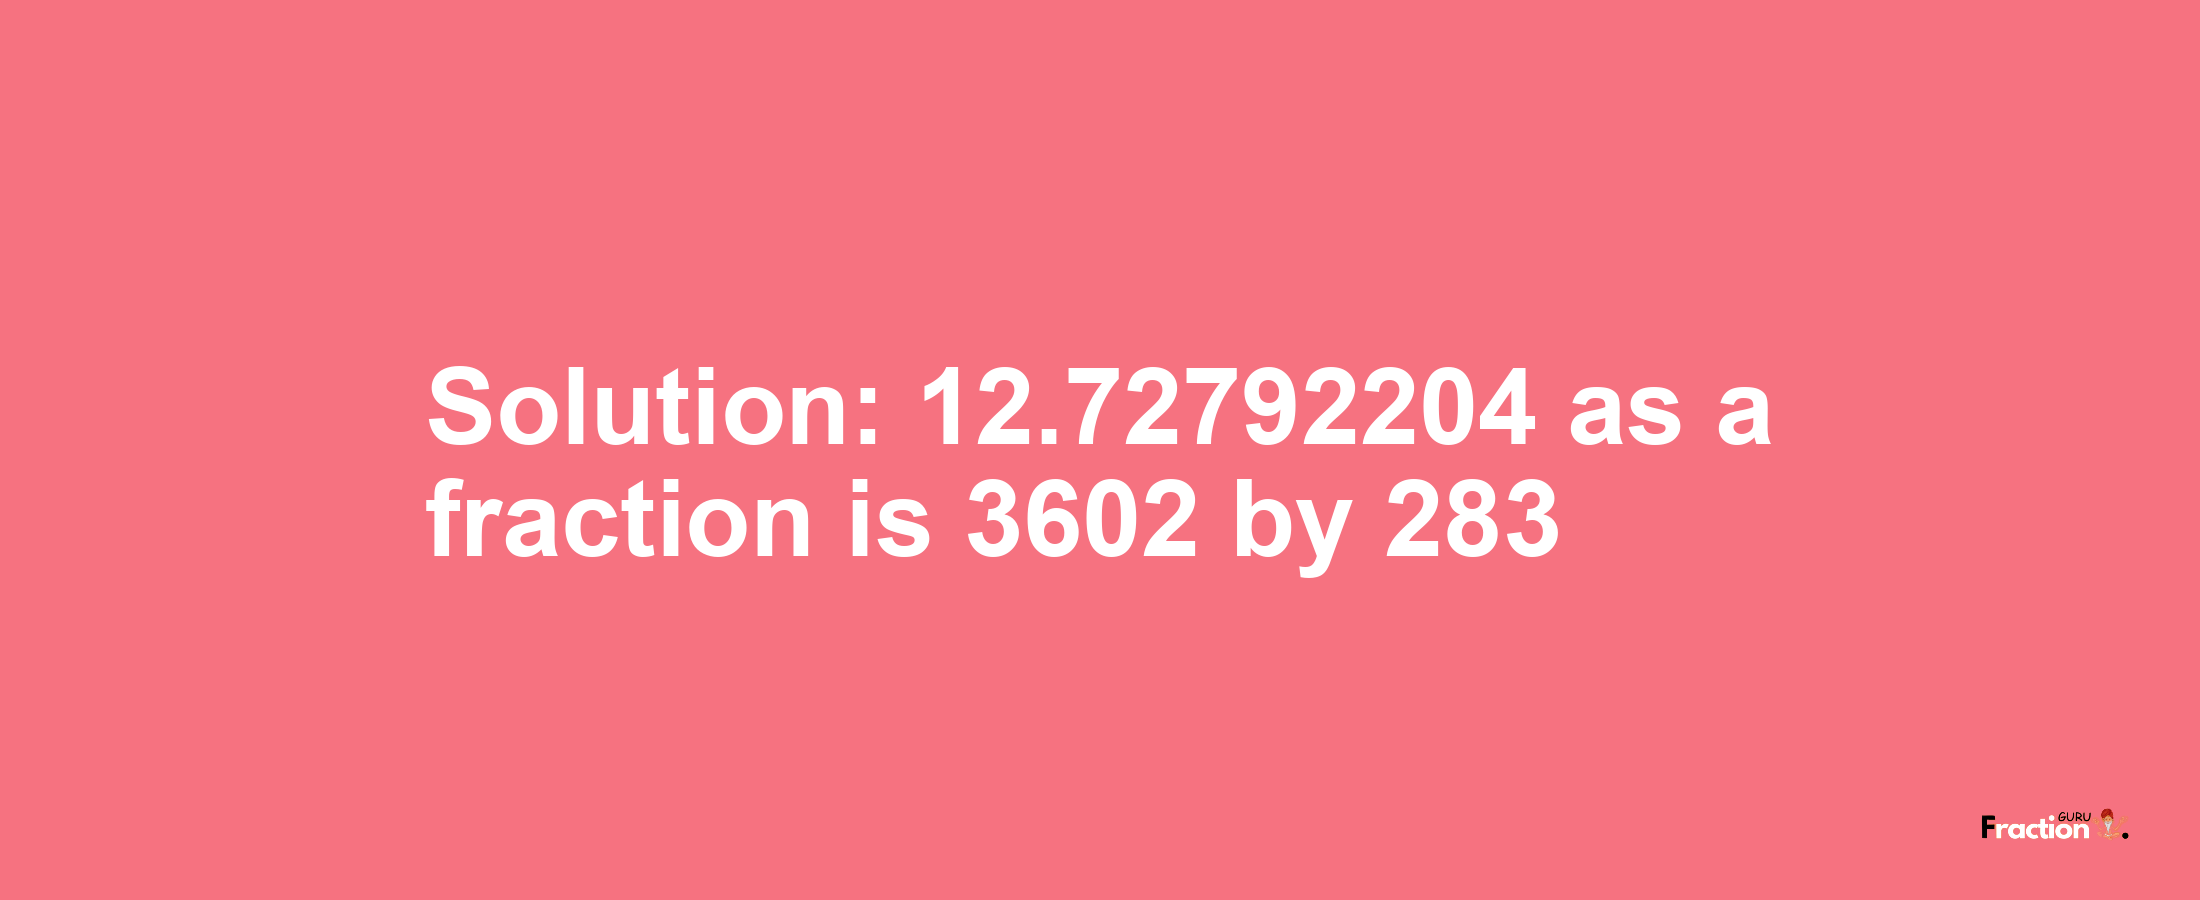 Solution:12.72792204 as a fraction is 3602/283